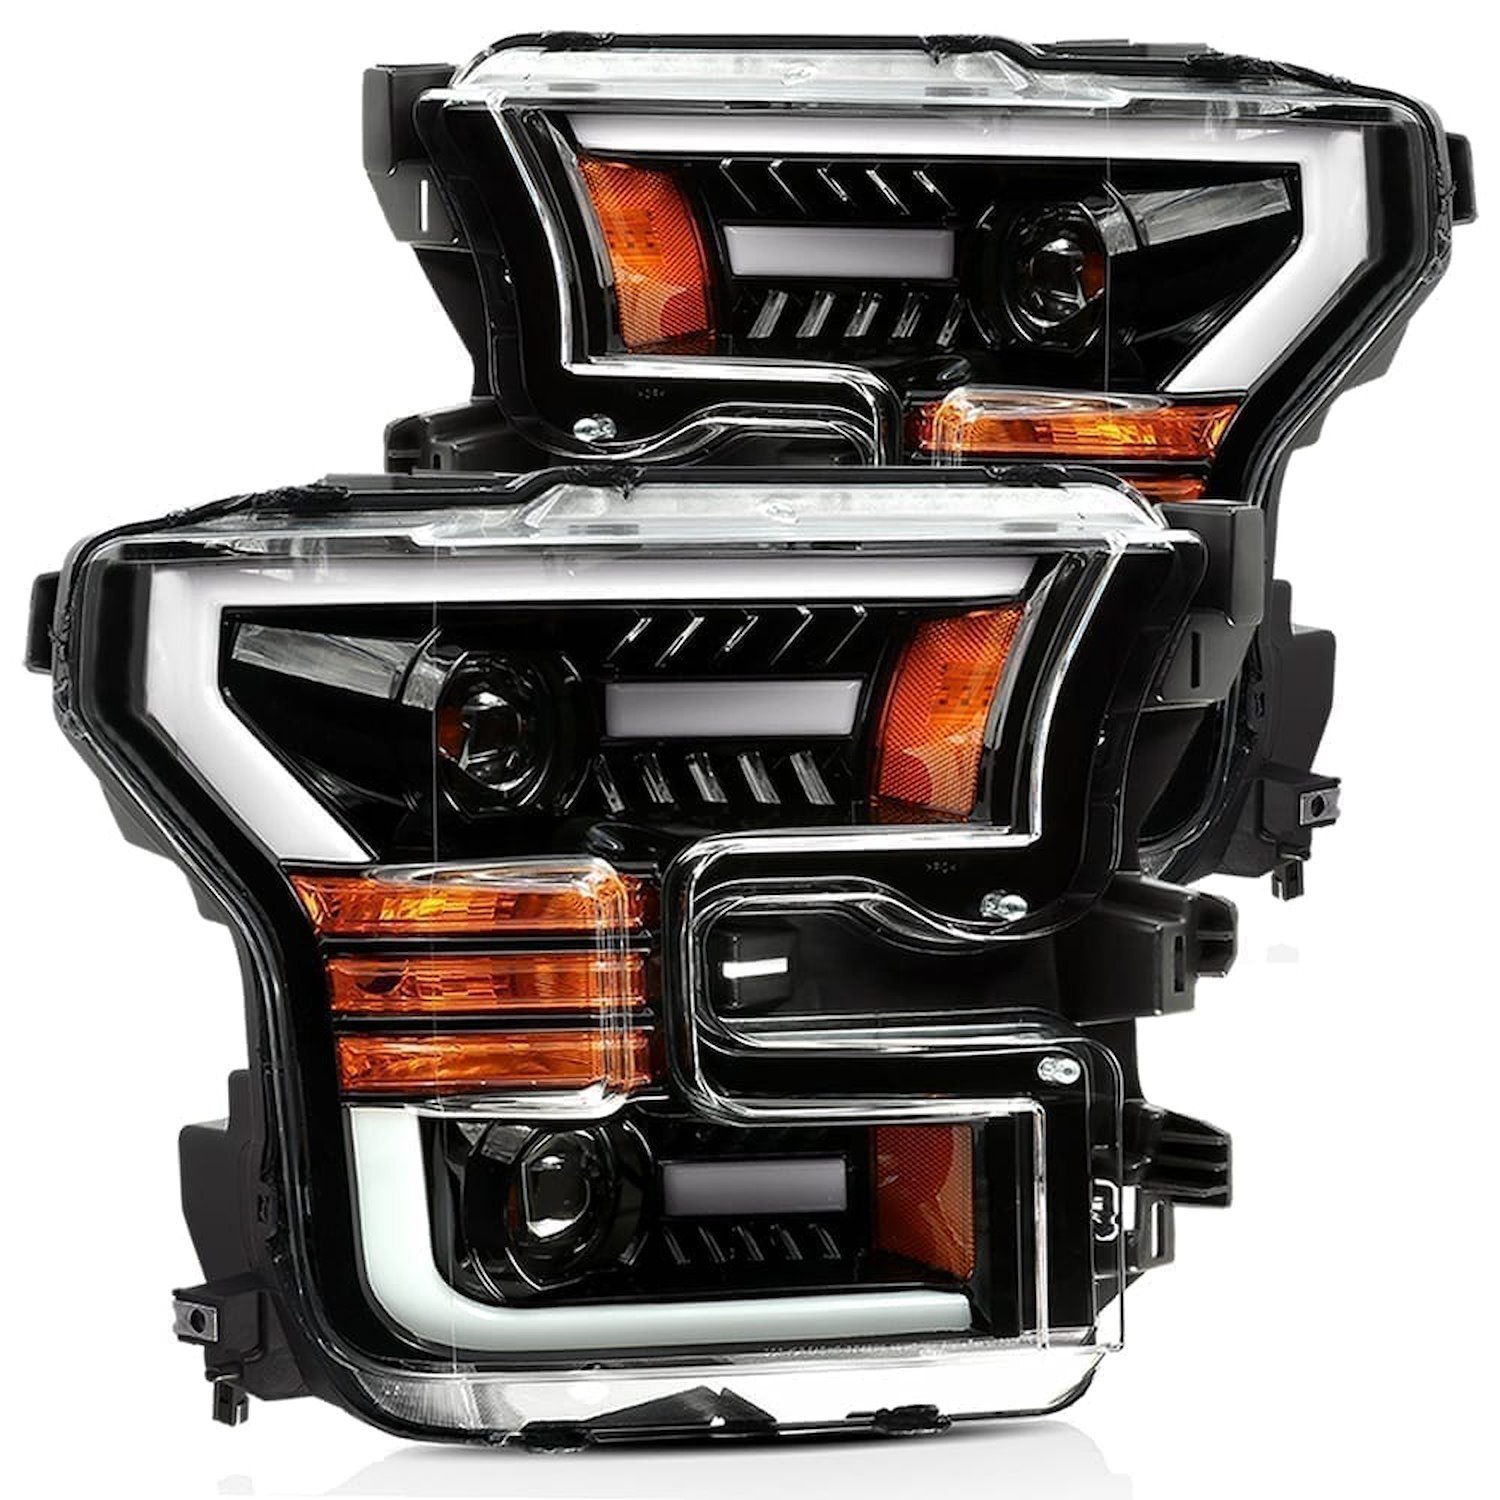 880168 Luxx-Series LED Projector Headlights for 2015-2017 Ford F-150 - Jet Black